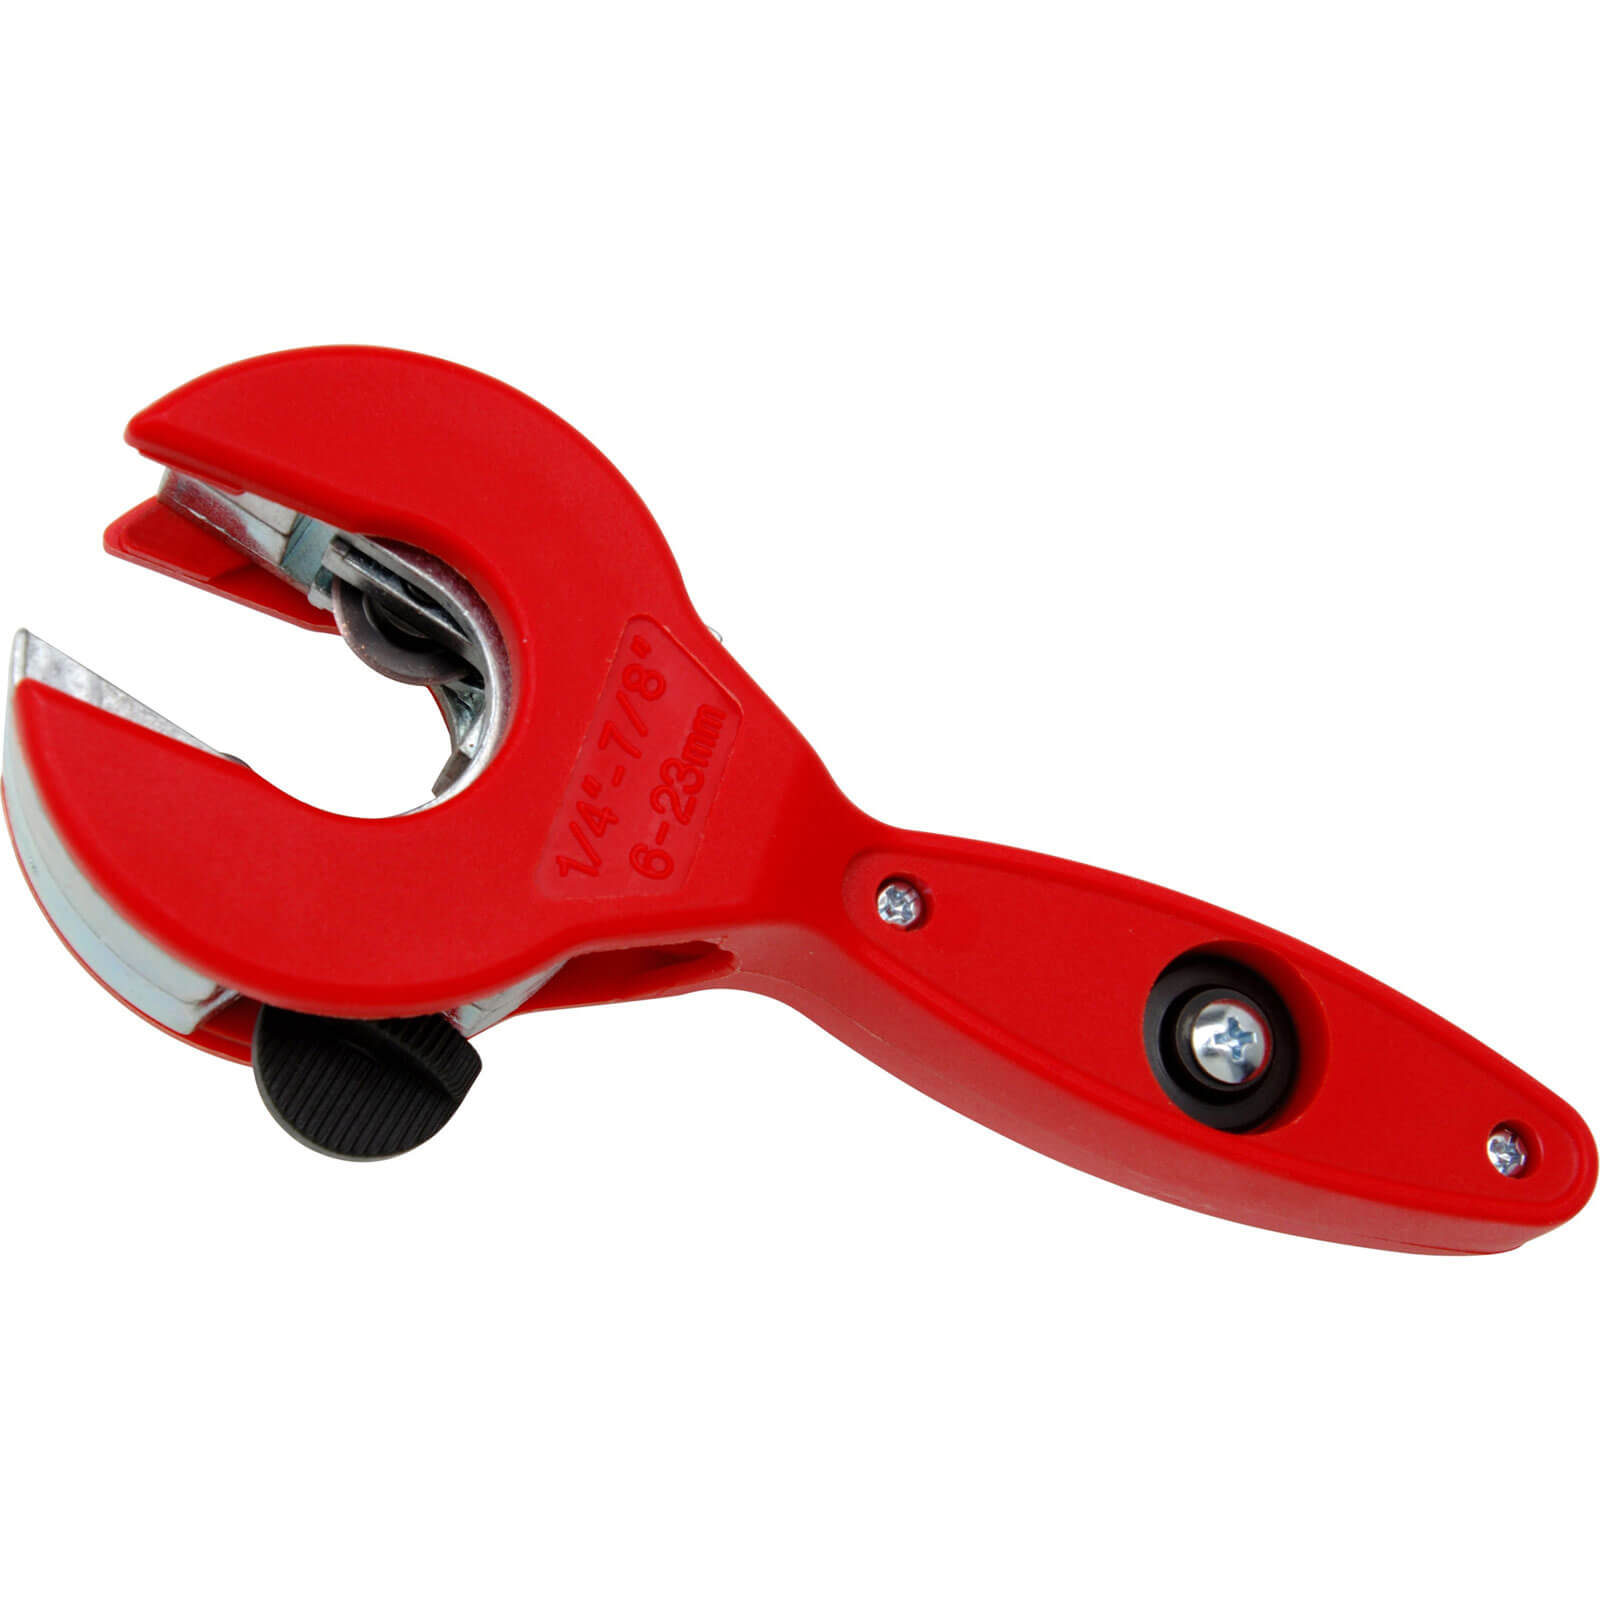 Photos - Other Hand Tools Wiss Ratchet Pipe Cutters 6mm - 23mm WRPCMDEU